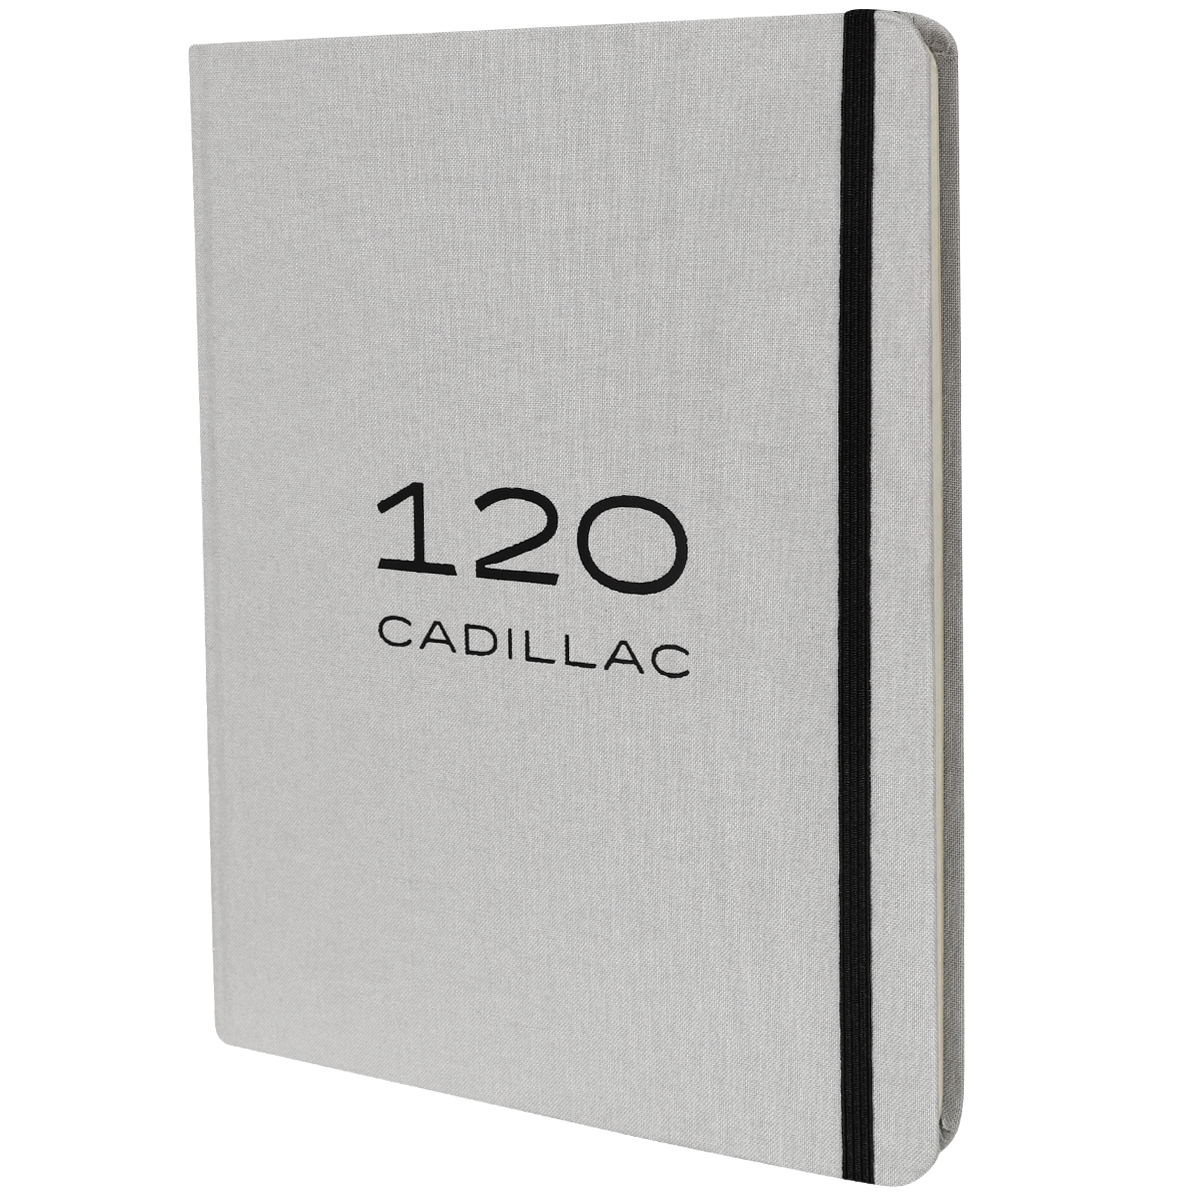 120th HardCover Journal